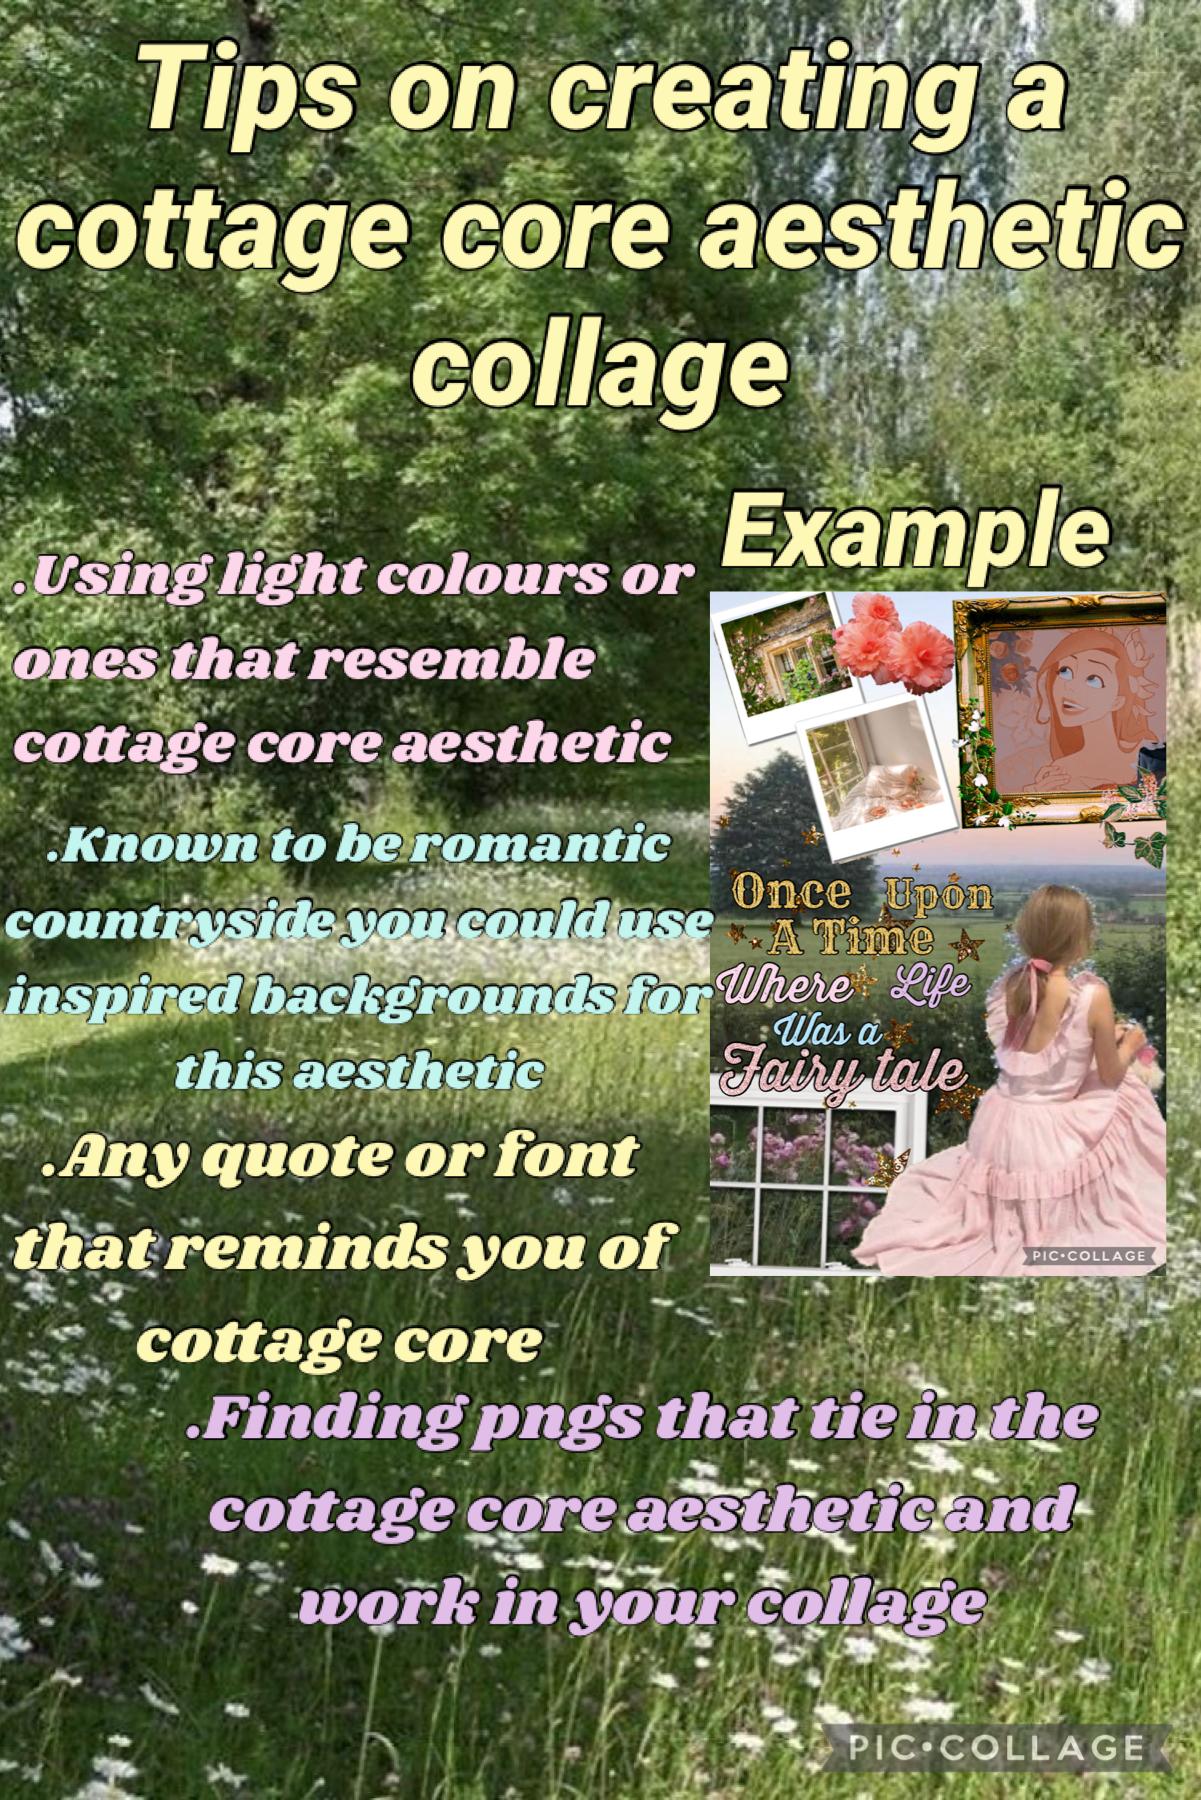 30.9.21 Tips on creating a cottage core aesthetic collage 